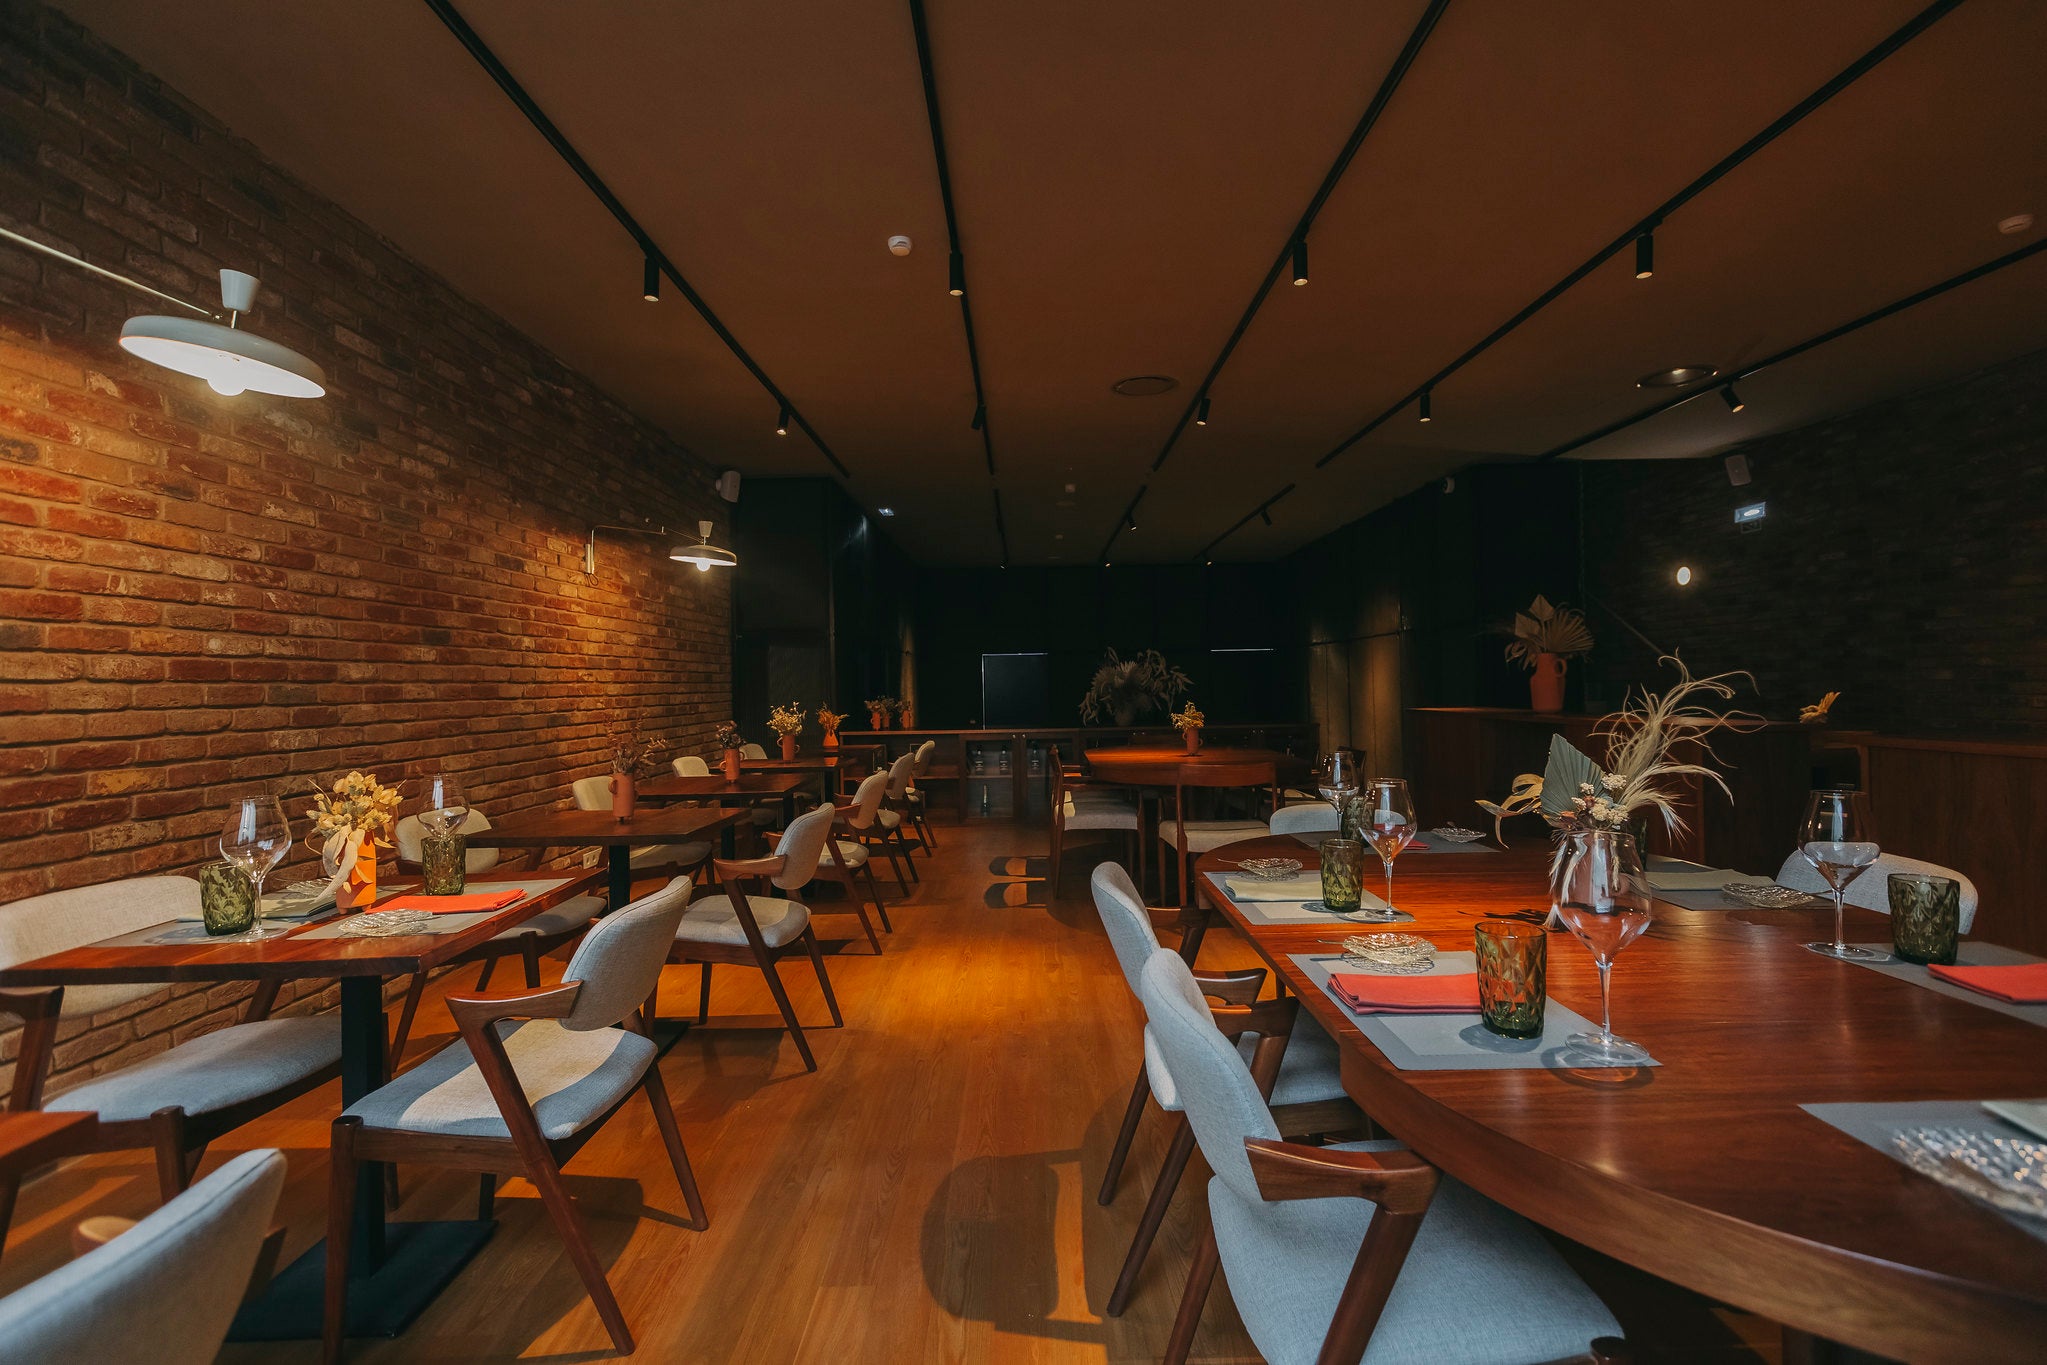 The restaurant offers a tasty twist on traditional Portuguese dining